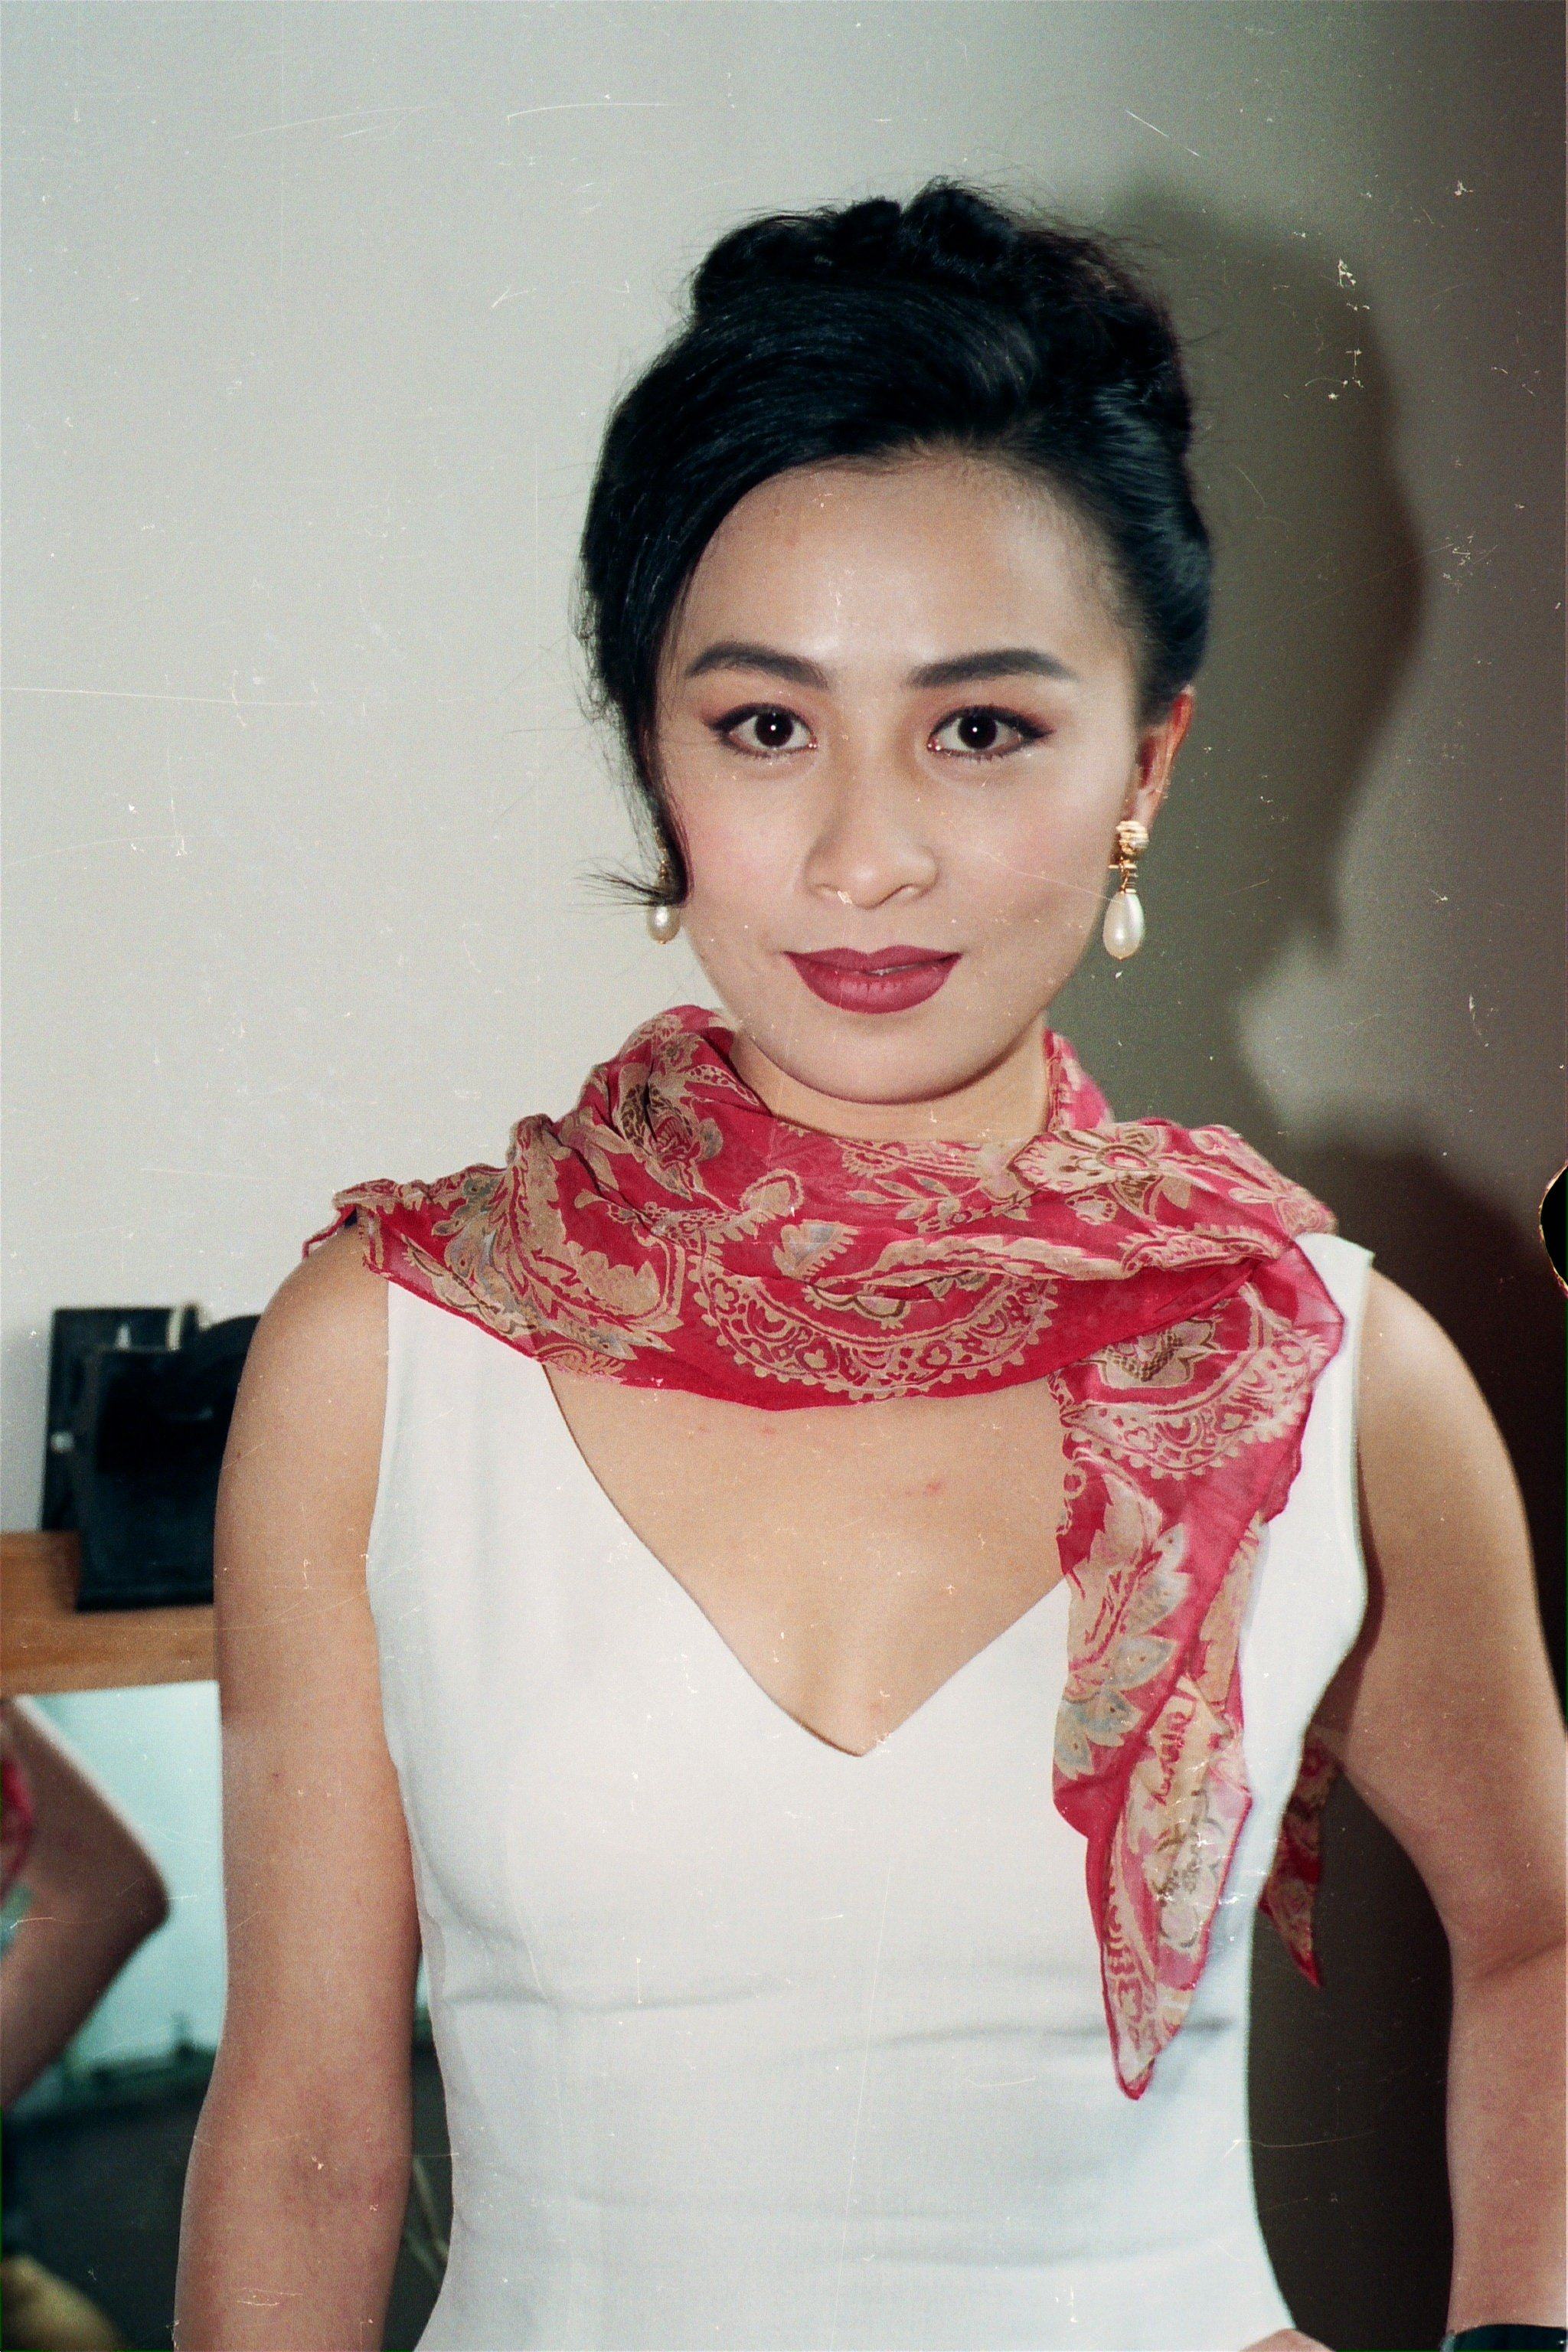 A topless photo of actress Carina Lau (above), taken against her will, was published in a Hong Kong magazine in 2002, causing an uproar. Photo: SCMP